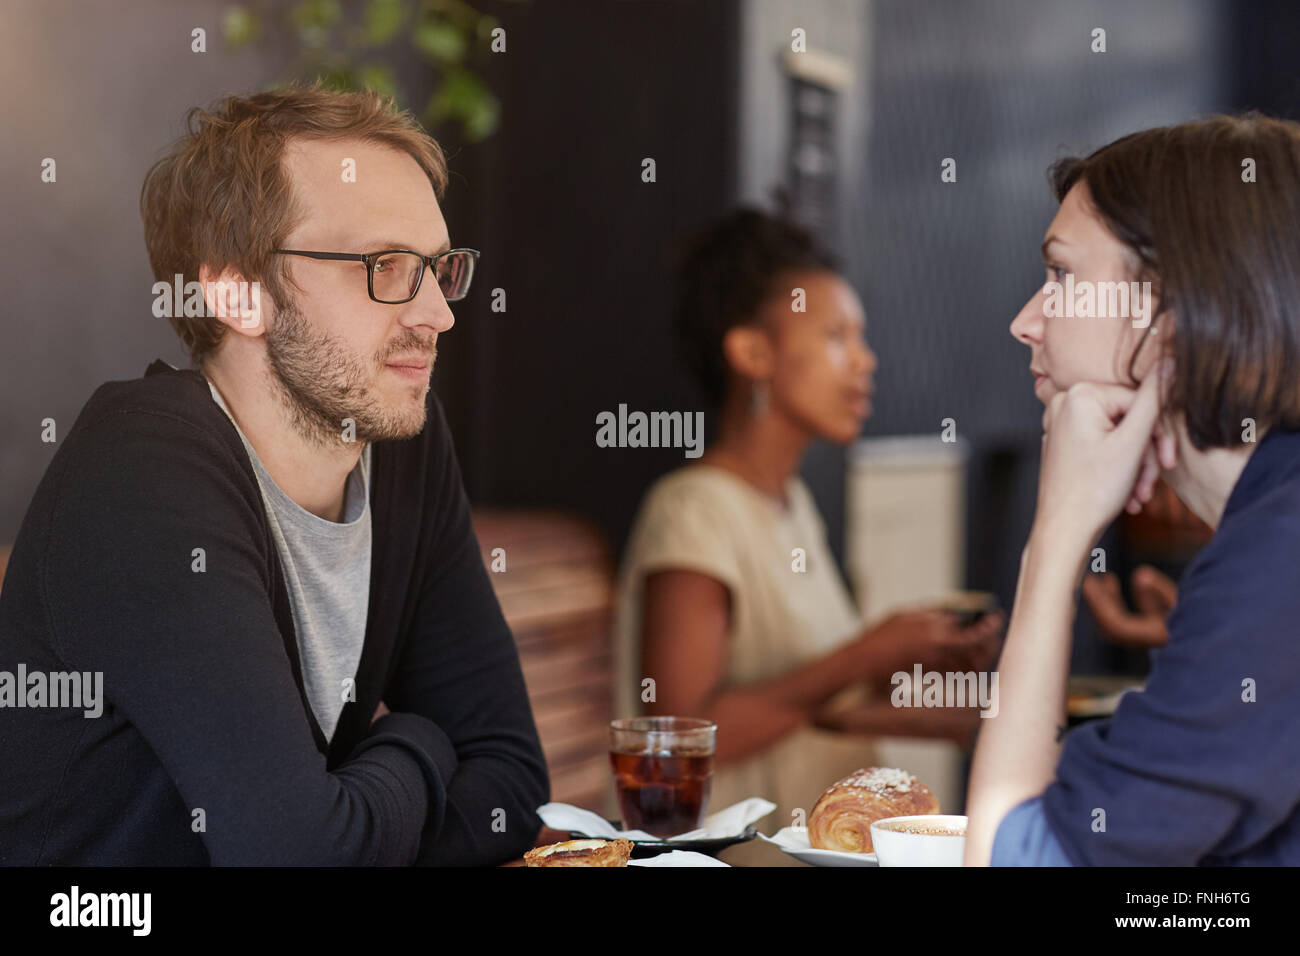 Man looking serious at a cafe table with female companion Stock Photo